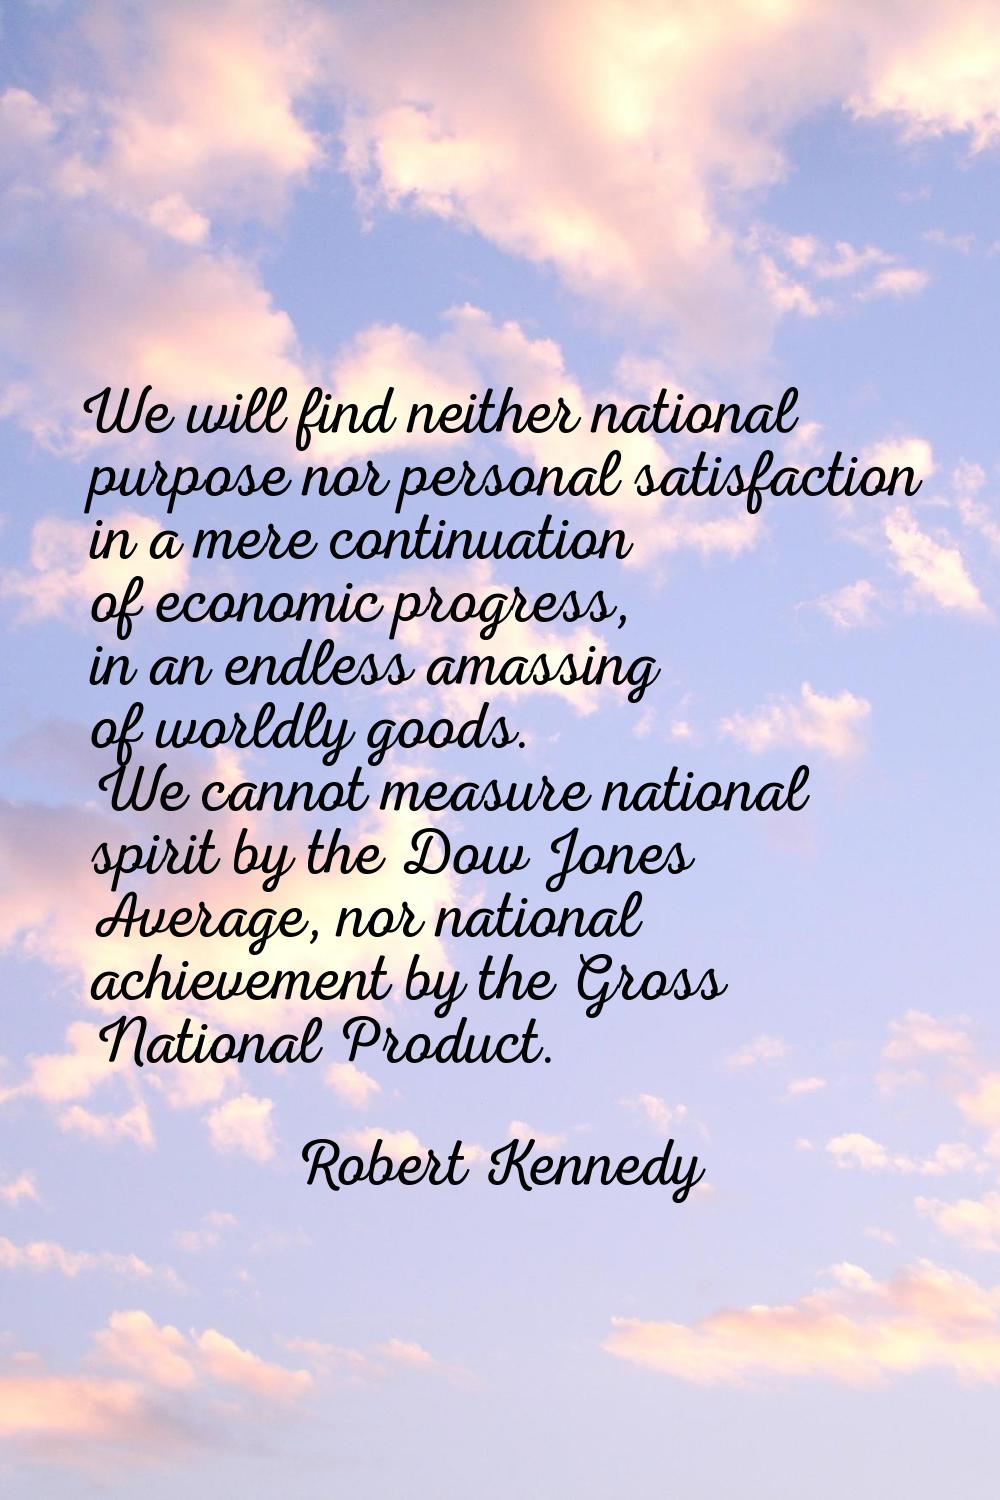 We will find neither national purpose nor personal satisfaction in a mere continuation of economic 